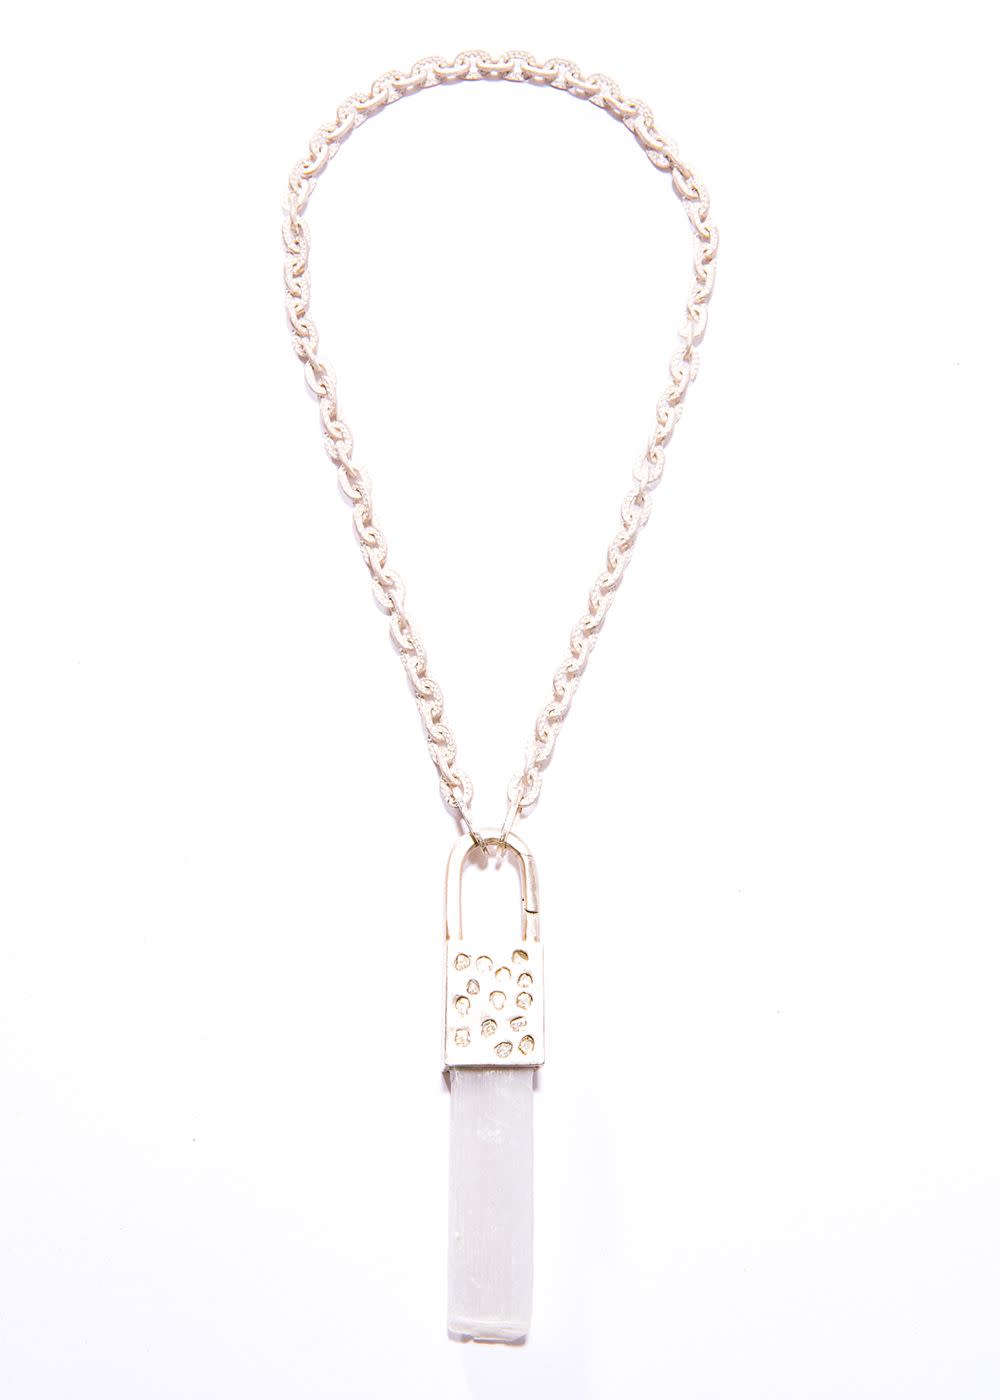 Acid Wash Hand Hammered Sterling Links Chain w/Sterling Conflict Free Diamond & Selenite Shard #9027